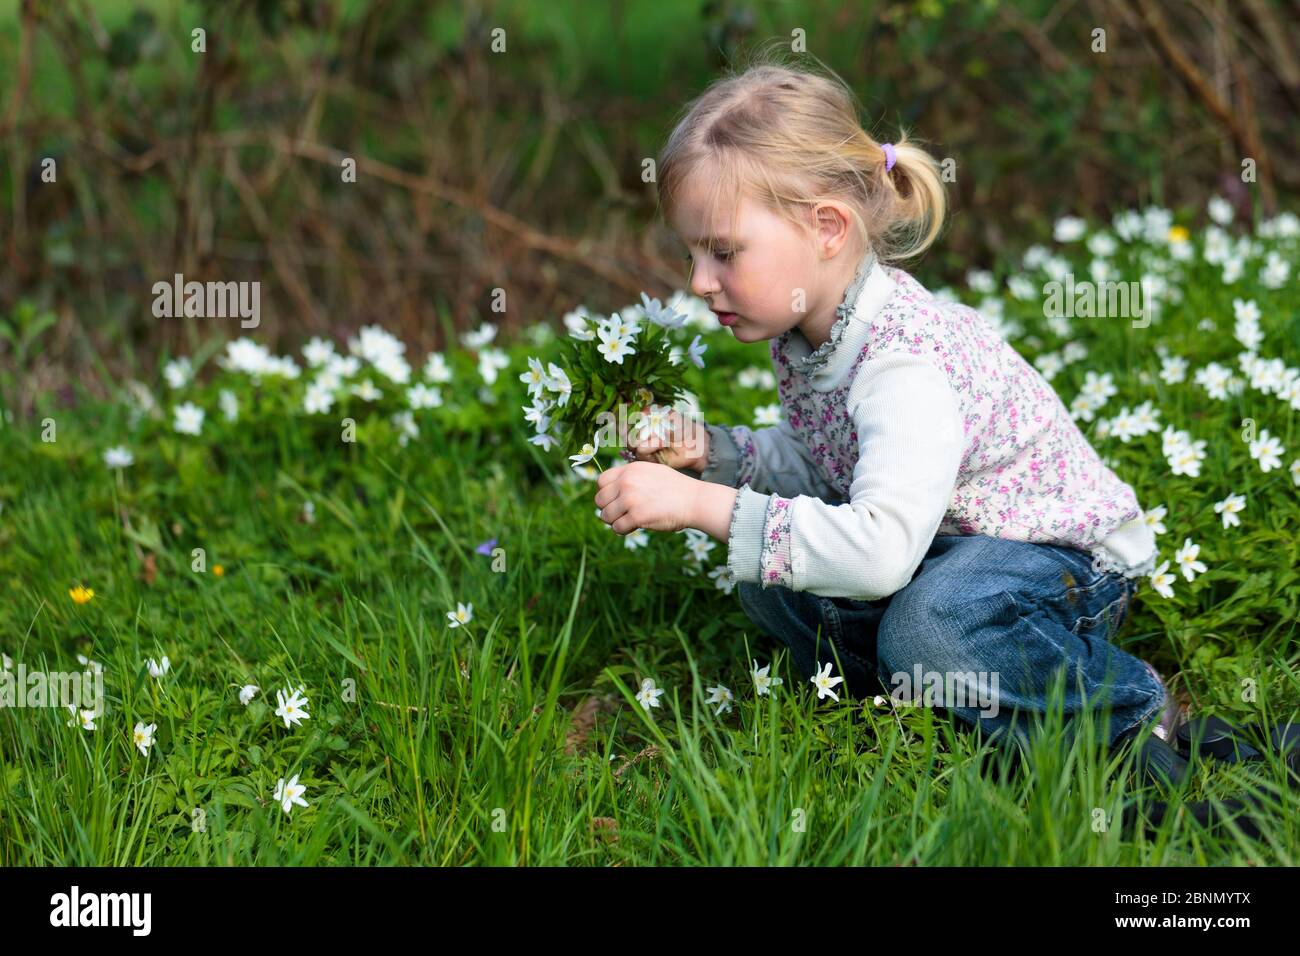 Young girl picking bunch of Wood anemone (Anemone nemorosa) flowers, early spring in France. Model released Stock Photo